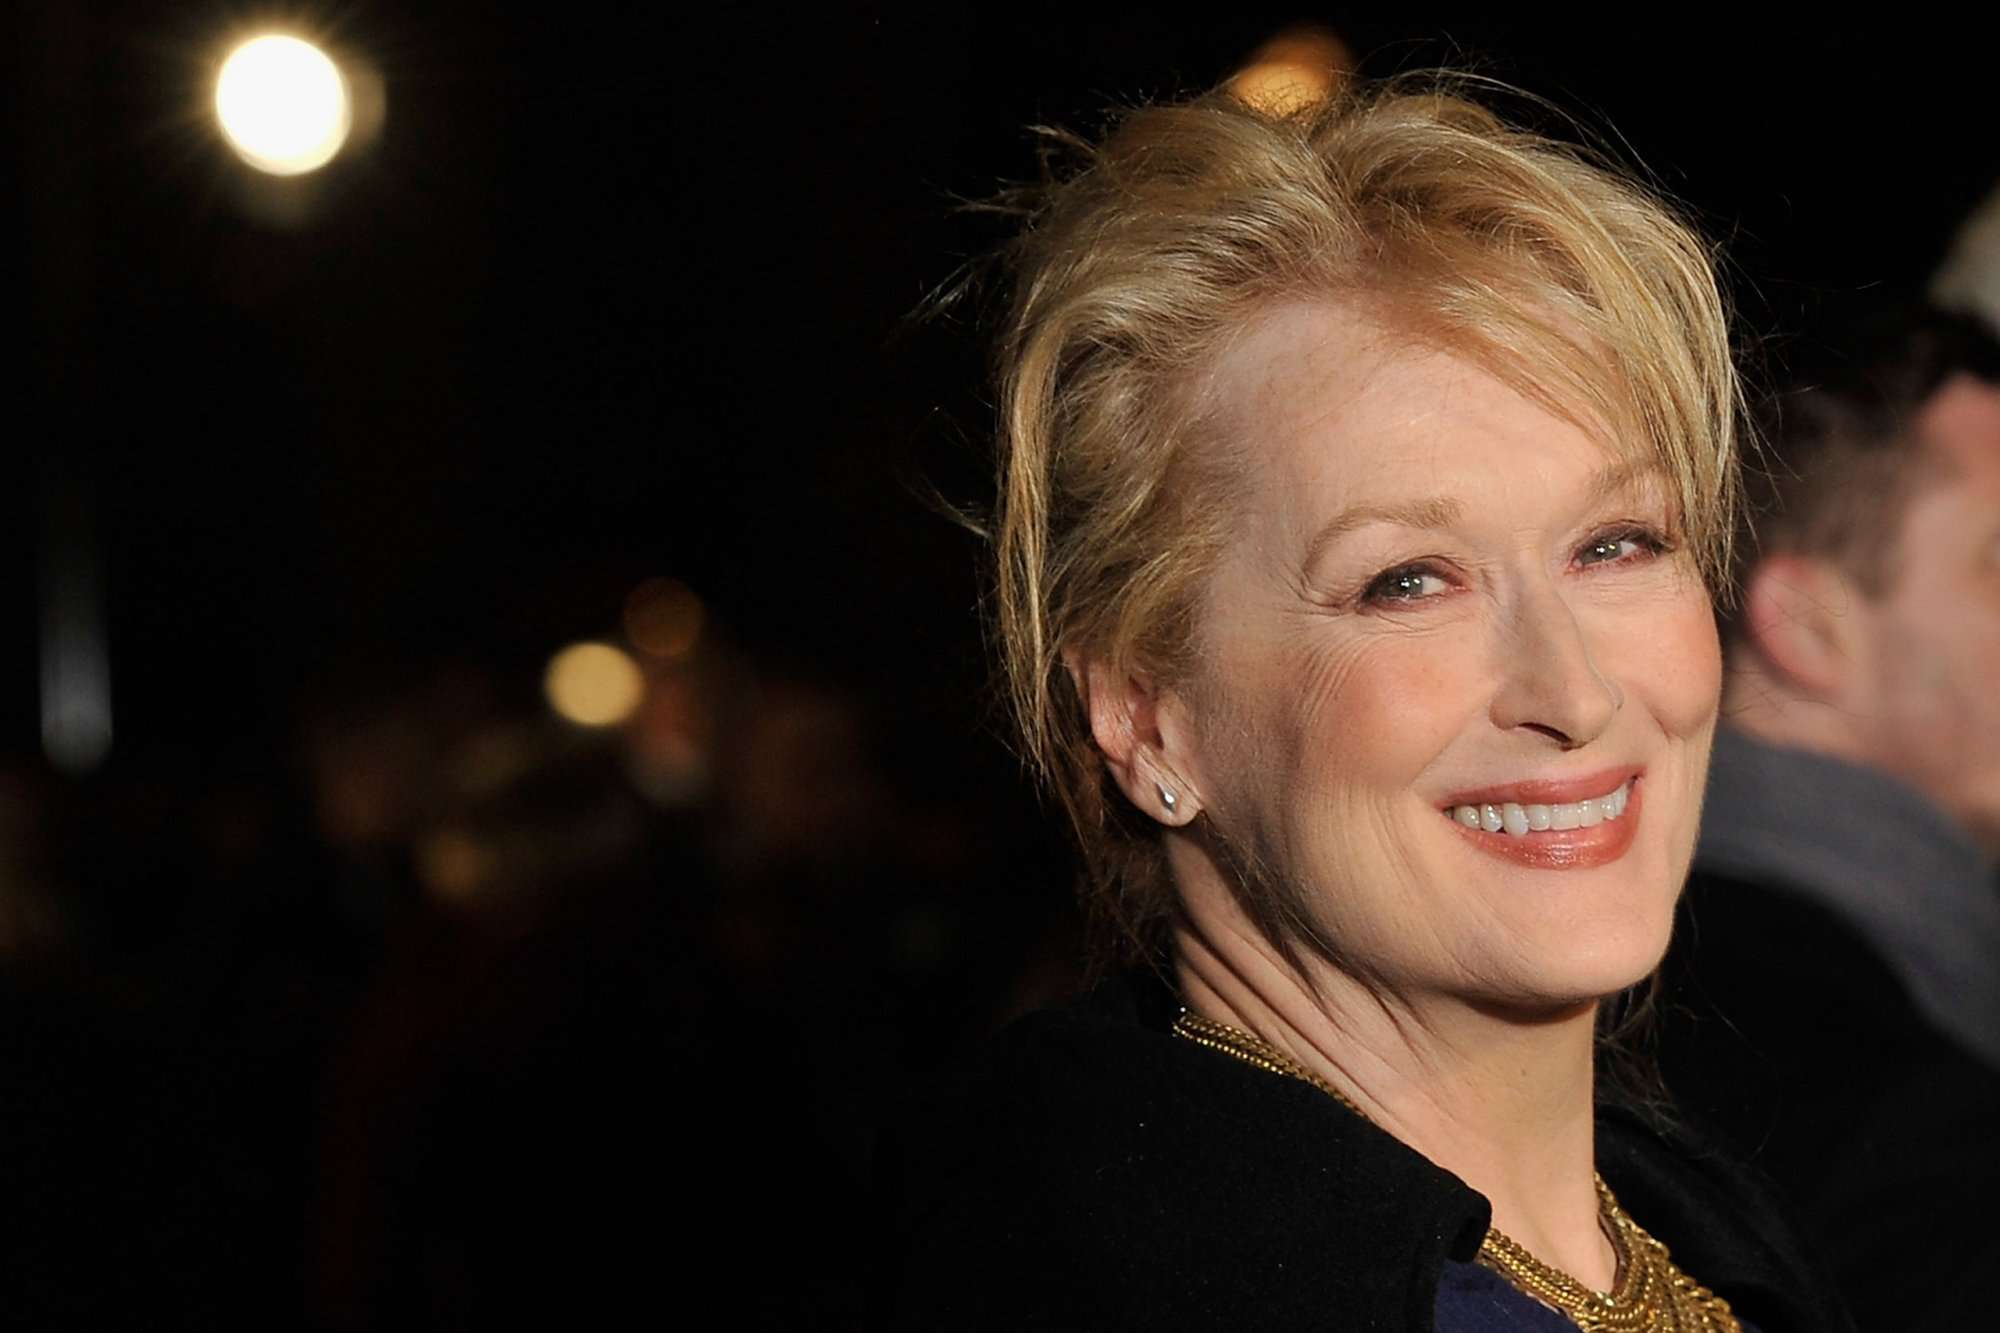 Meryl Streep has been praised for her incredible mastery of the roles she chooses.